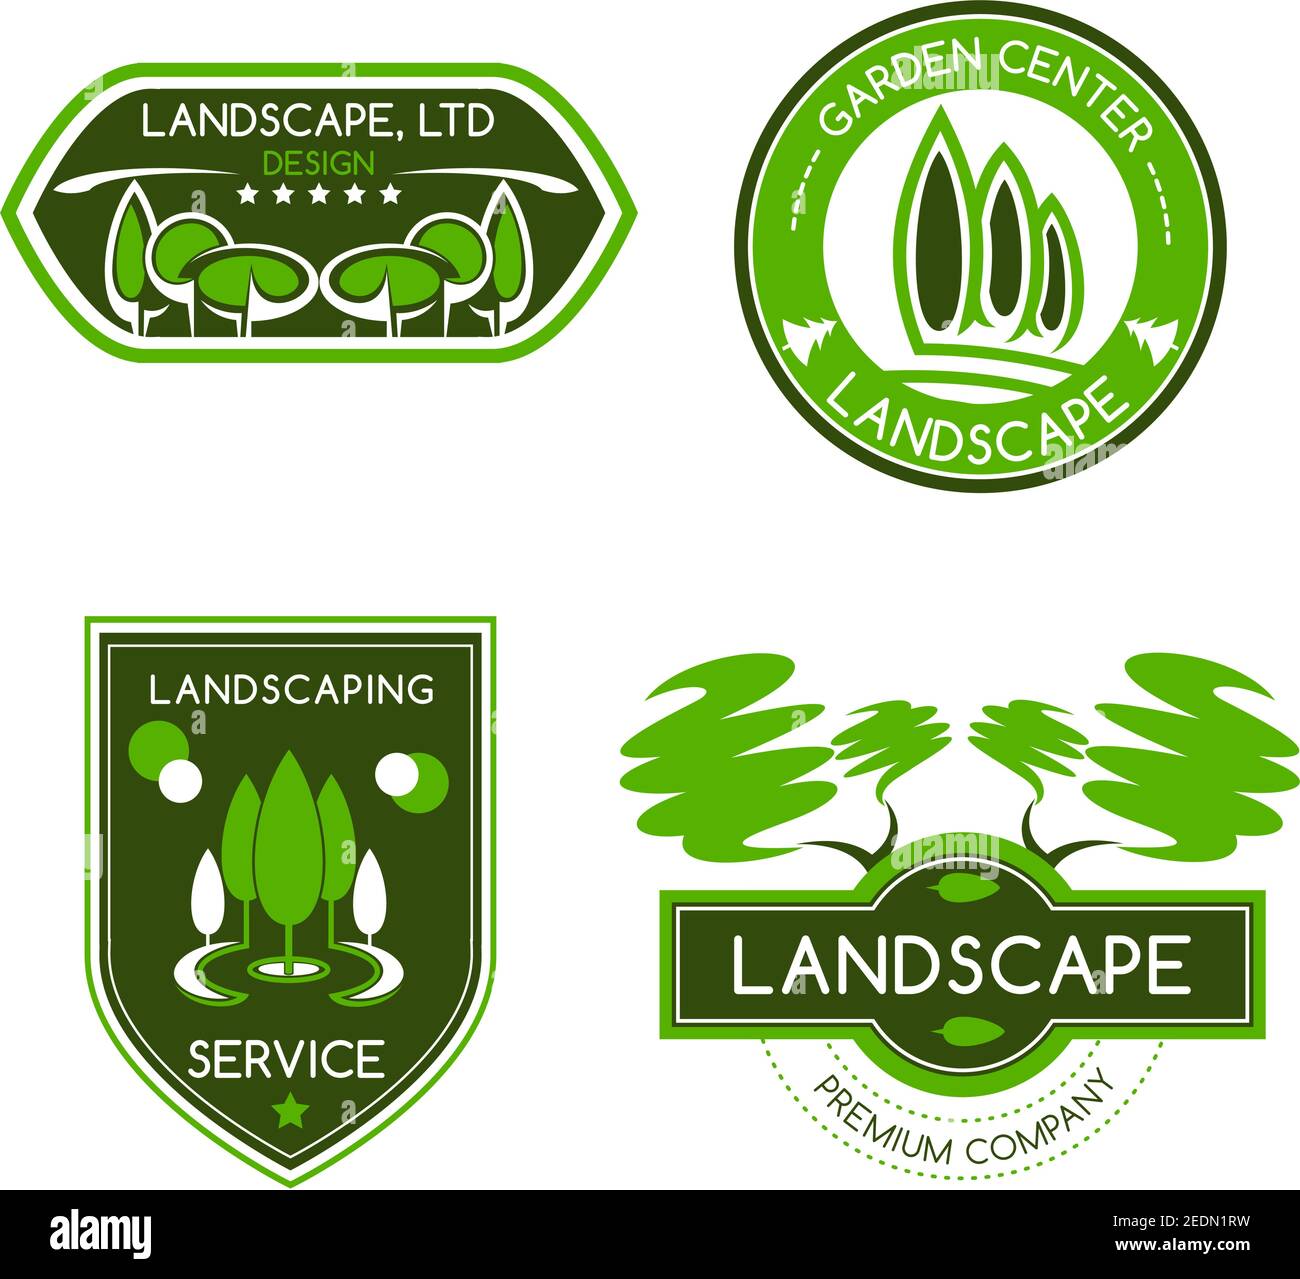 Landscape design label set. Landscaping and gardening services badges with green trees and leaves. Landscape architecture, garden center and landscape Stock Vector